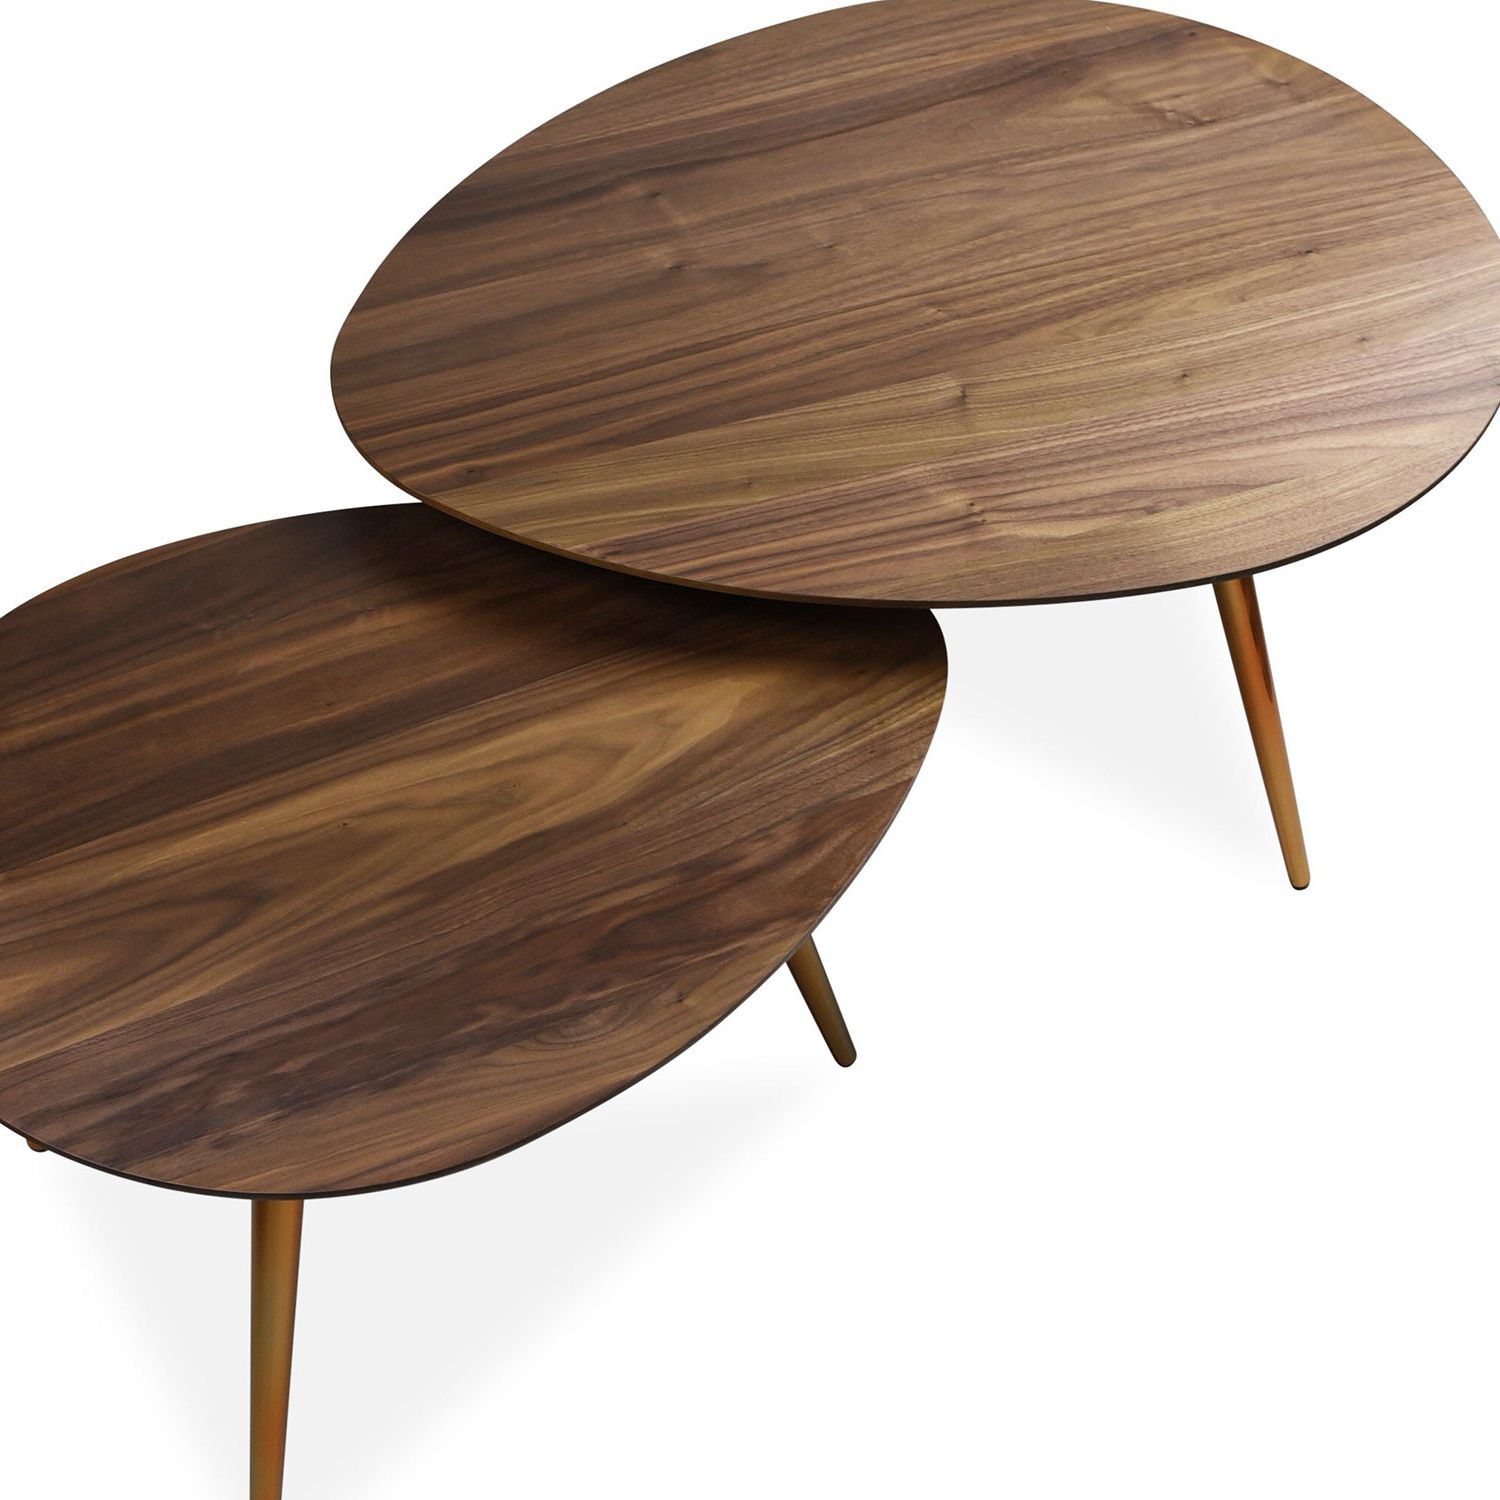 Maddox Mid Century Modern Nesting Coffee Table Set – Edloe Finch In 2020 Mid Century Modern Coffee Tables (View 9 of 15)